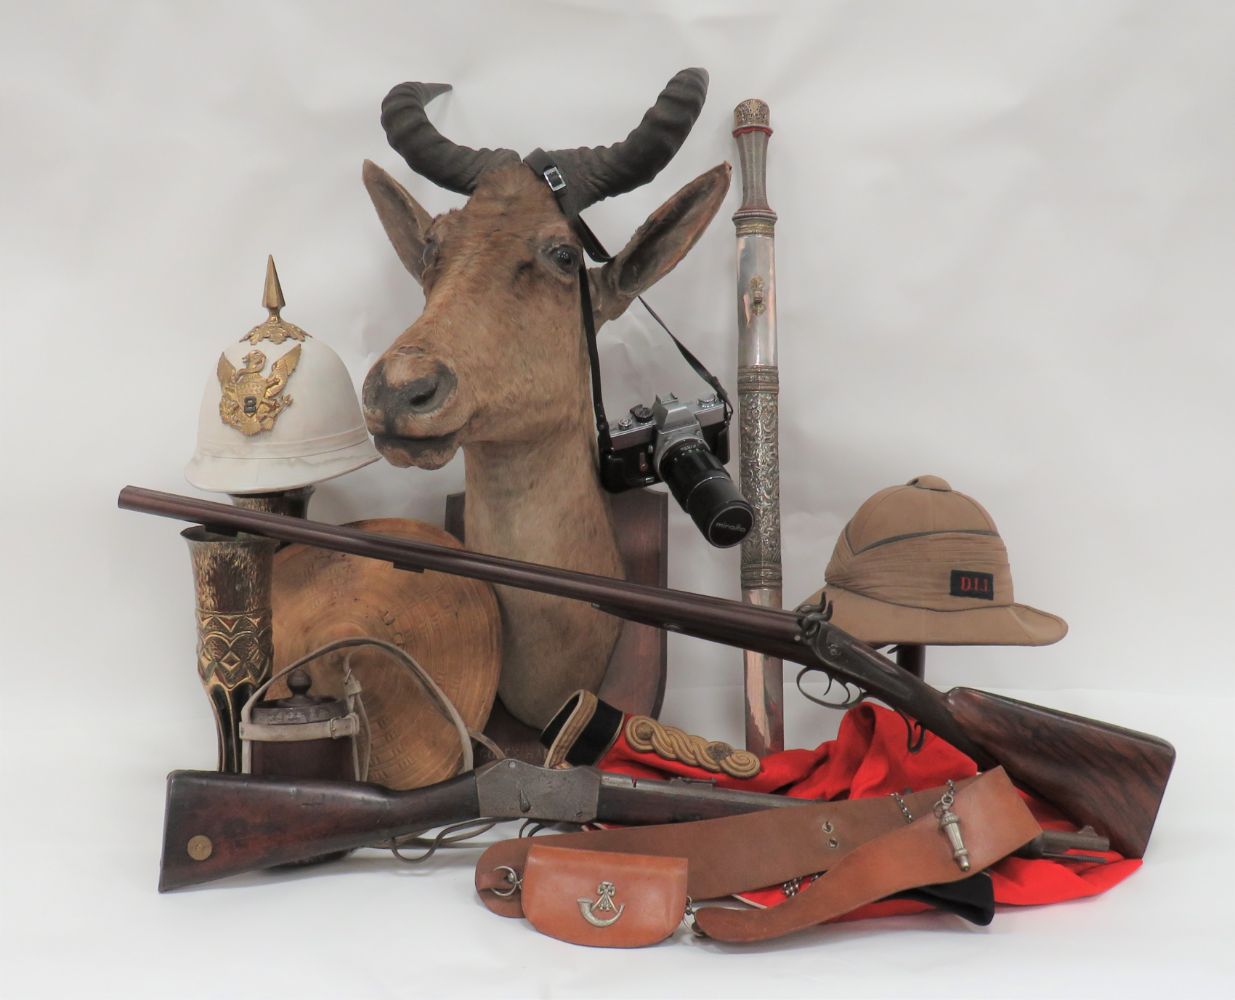 Militaria and Collectables all guaranteed original. ONLINE ONLY